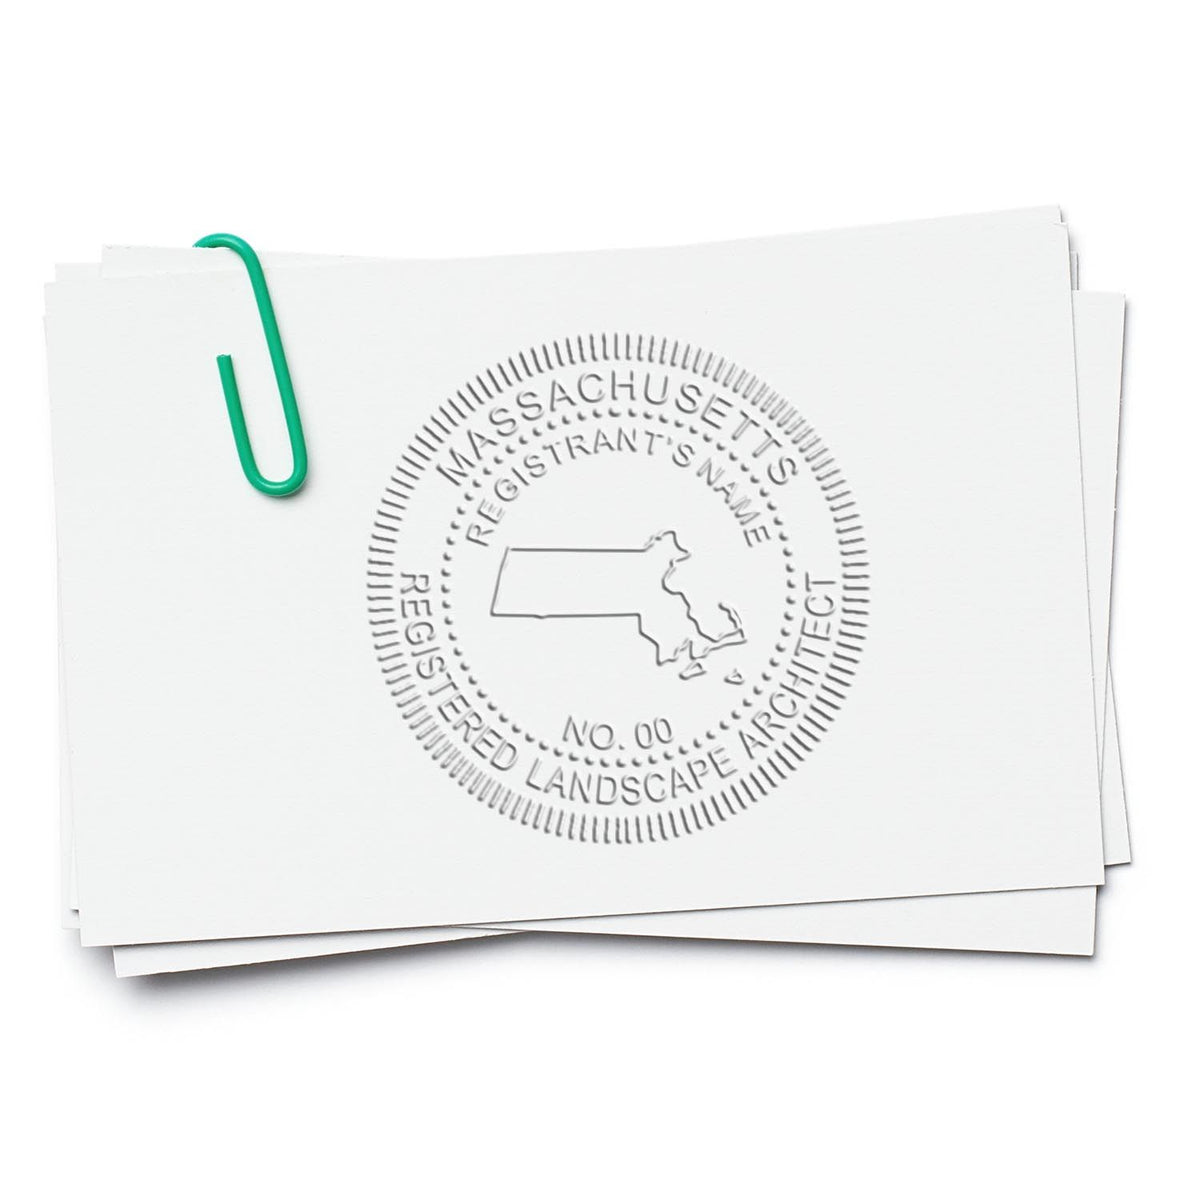 An alternative view of the Hybrid Massachusetts Landscape Architect Seal stamped on a sheet of paper showing the image in use